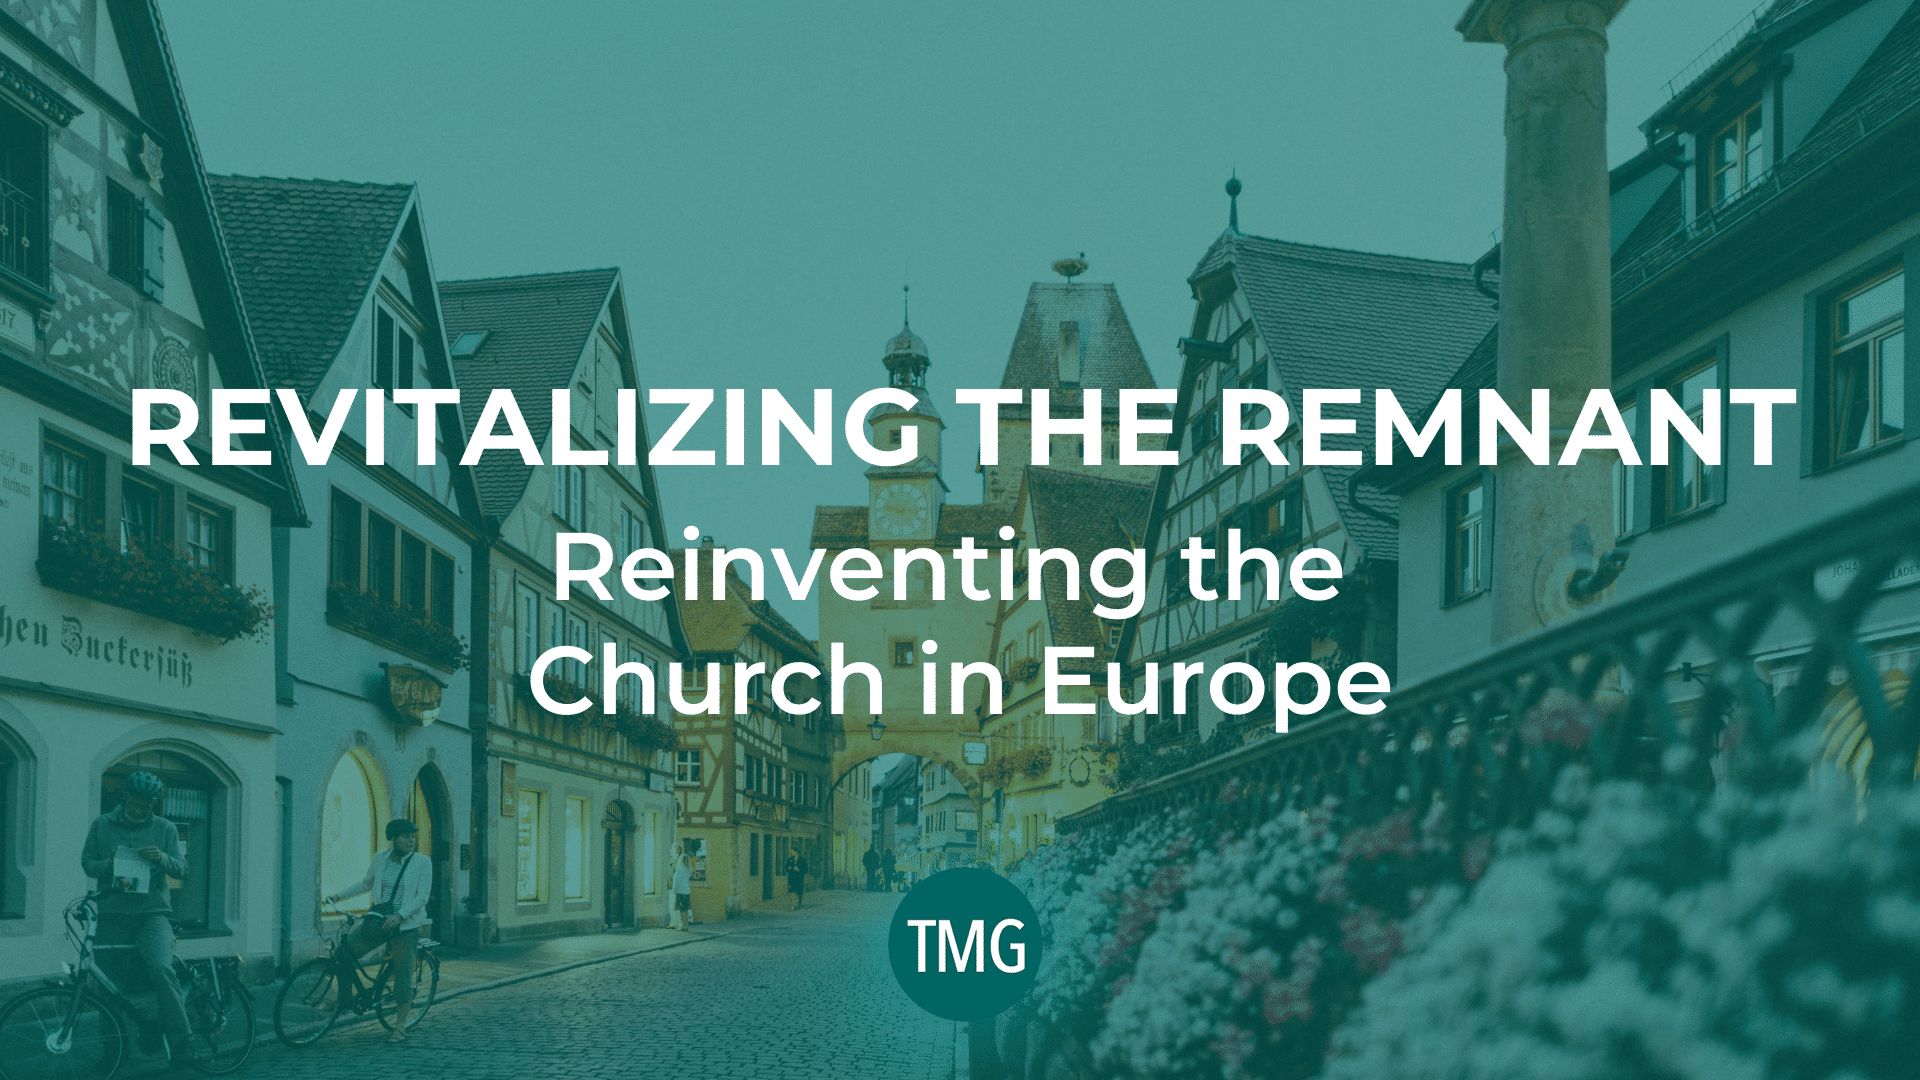 revitalizing-the-remnant-reinventing-the-church-in-europe-header